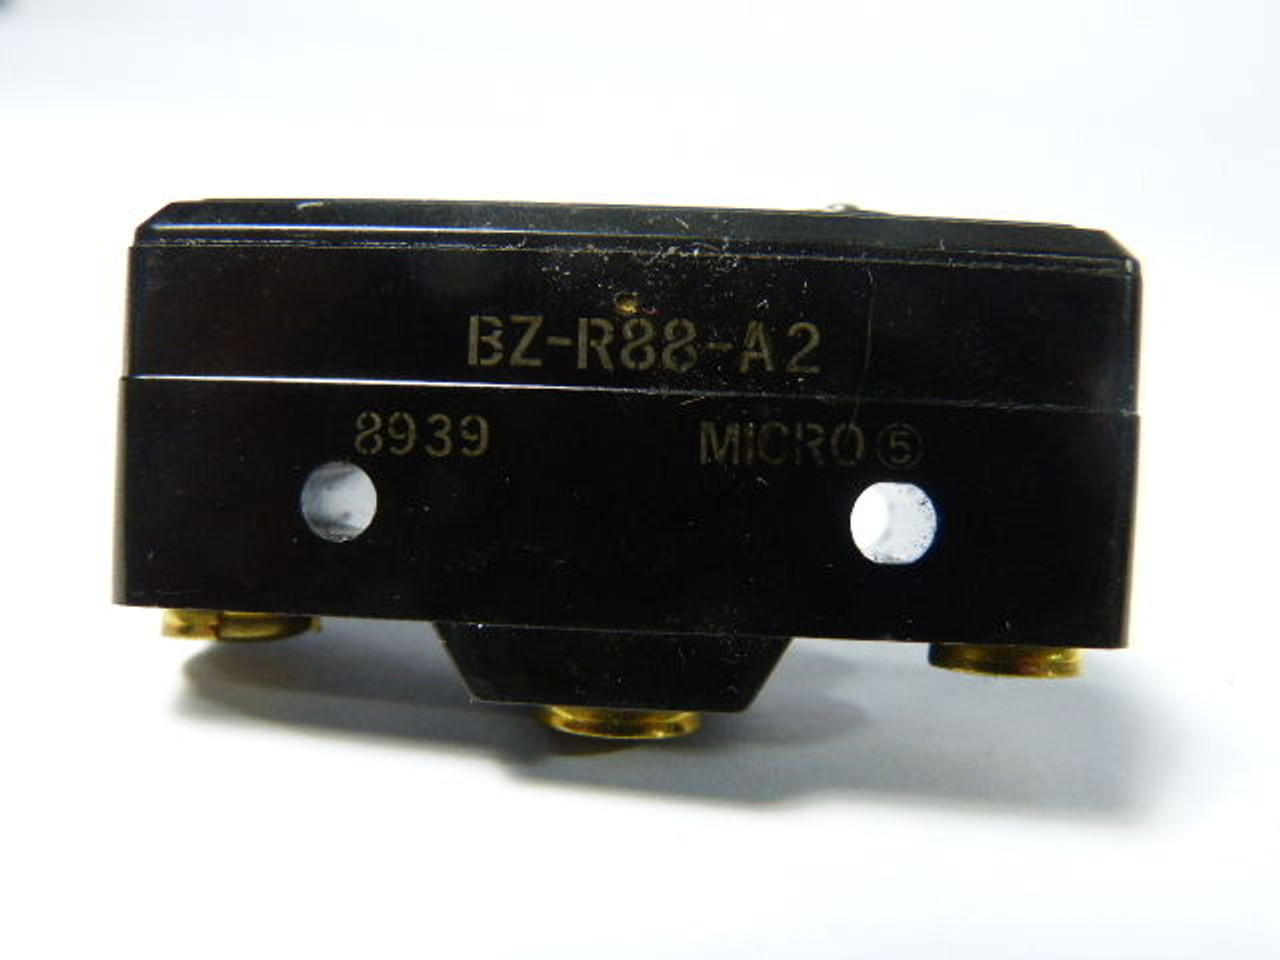 Microswitch BZ-R88-A2 Snap Action Pin Plunger Micro Switch 125/250/480V USED